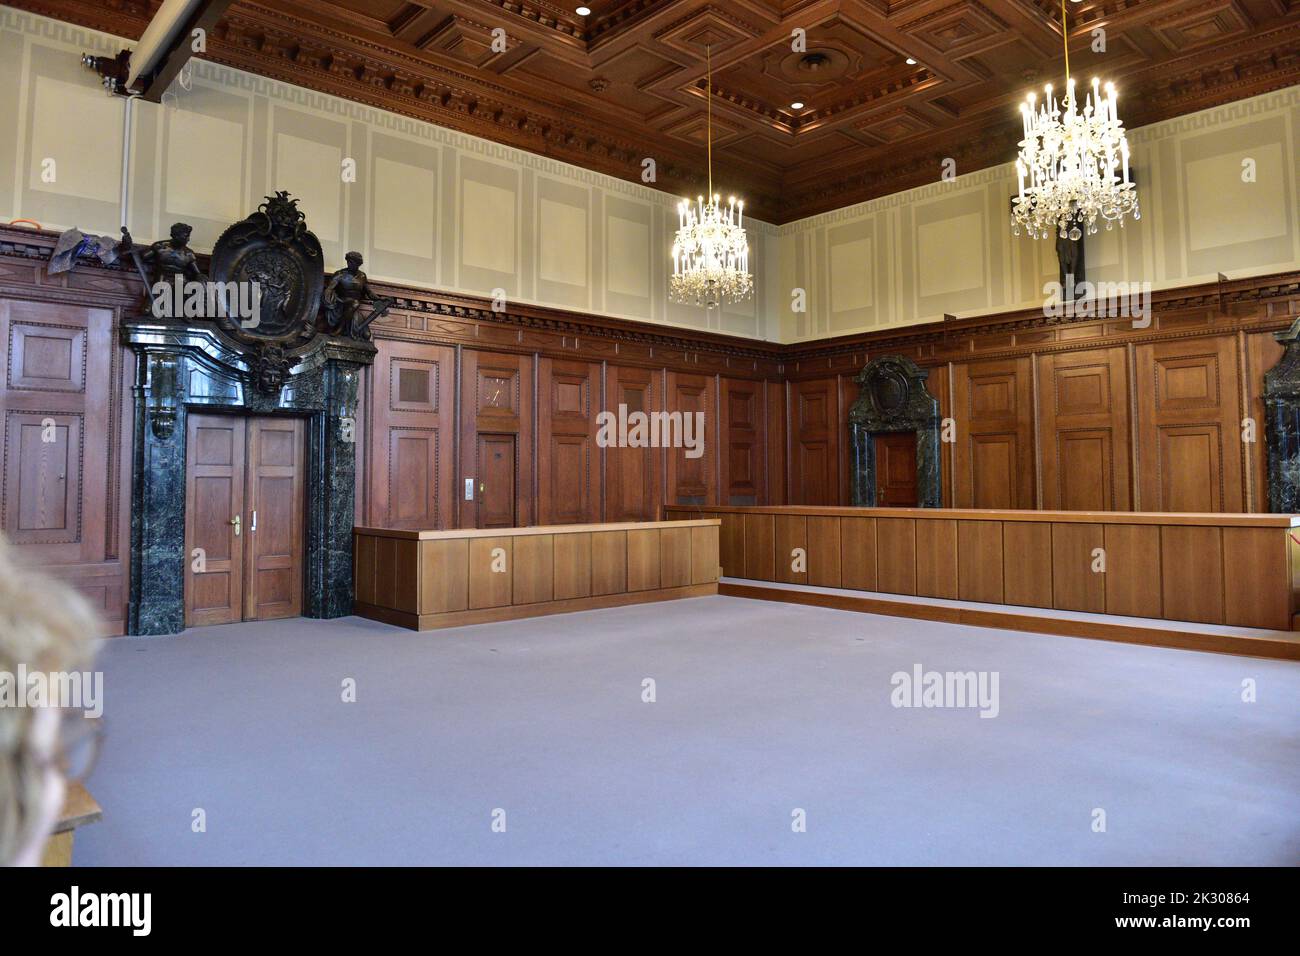 Memorium of the Nuremberg trials, the first criminal trials before an international military court took place here in jury court room 600 Stock Photo